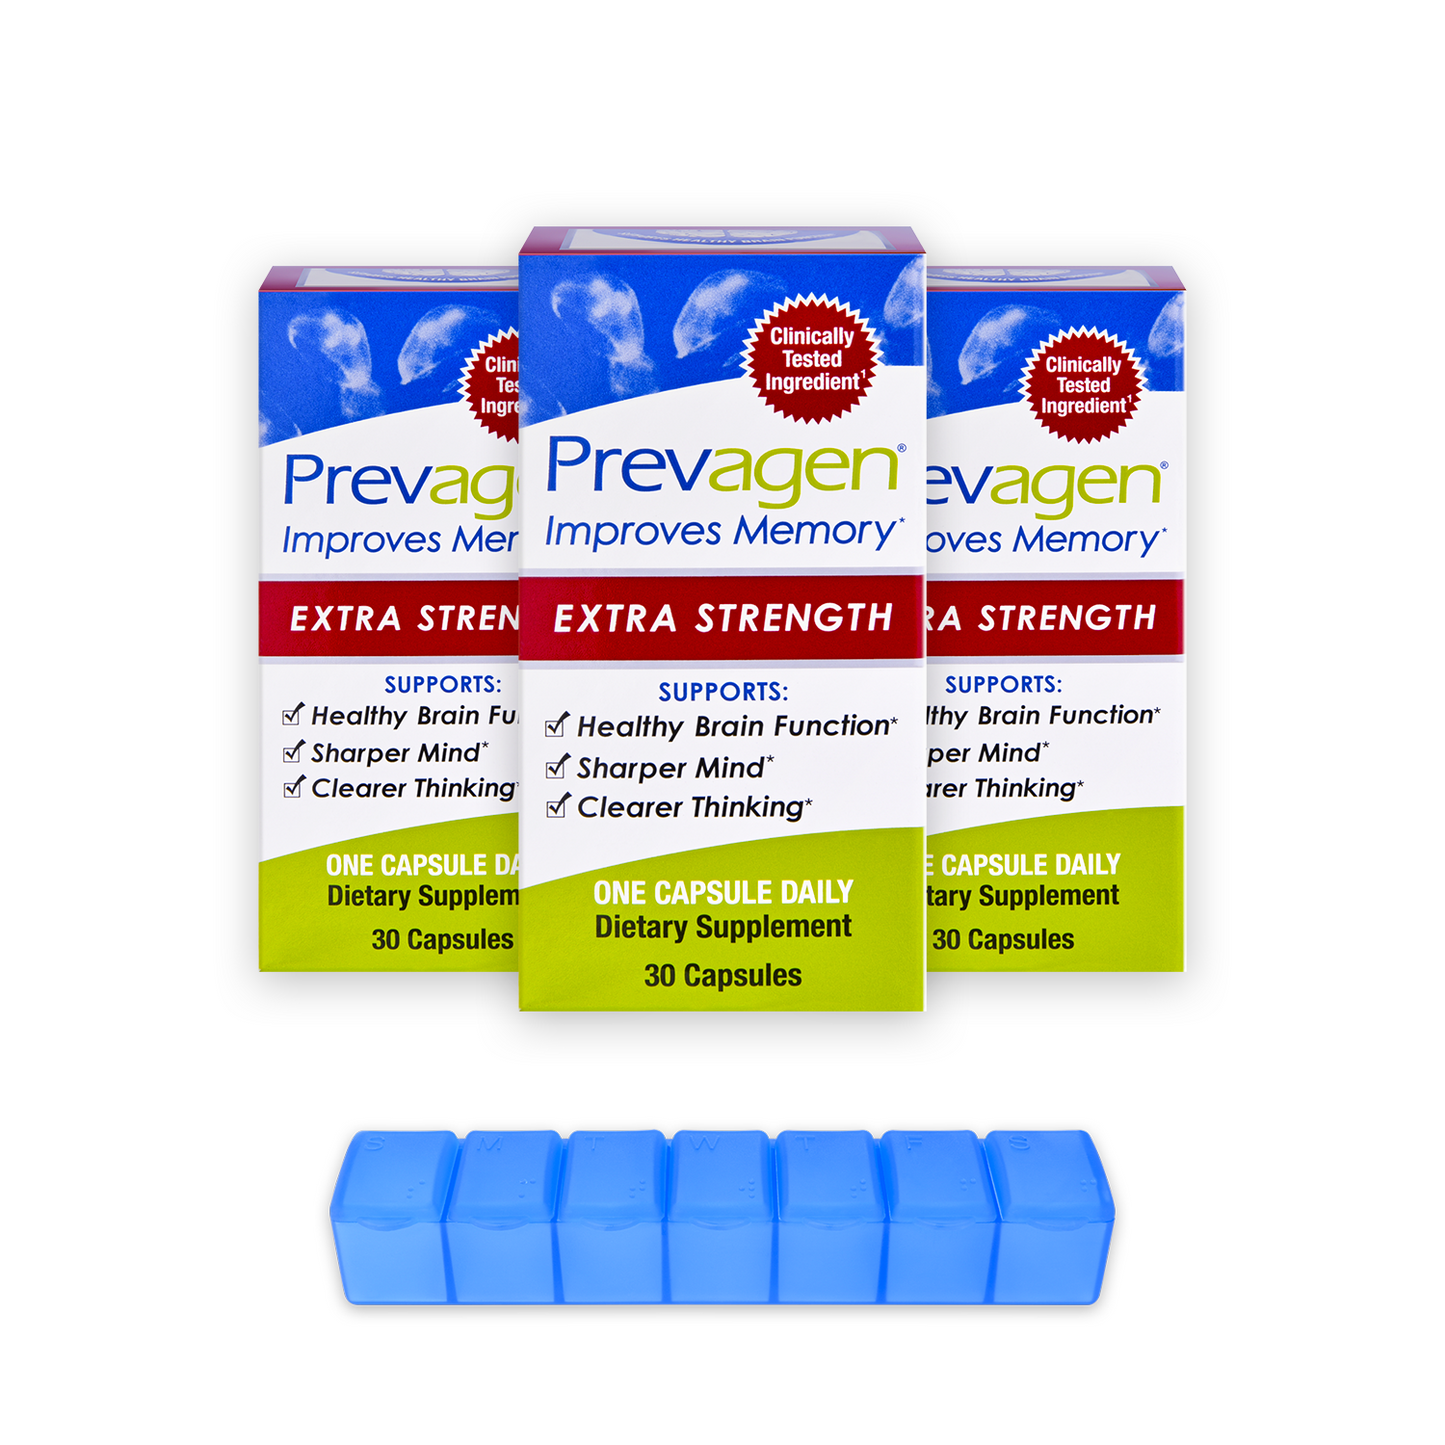 Prevagen® 20mg, 30 Capsules (3-Pack) with Prevagen 7-Day Pill Minder